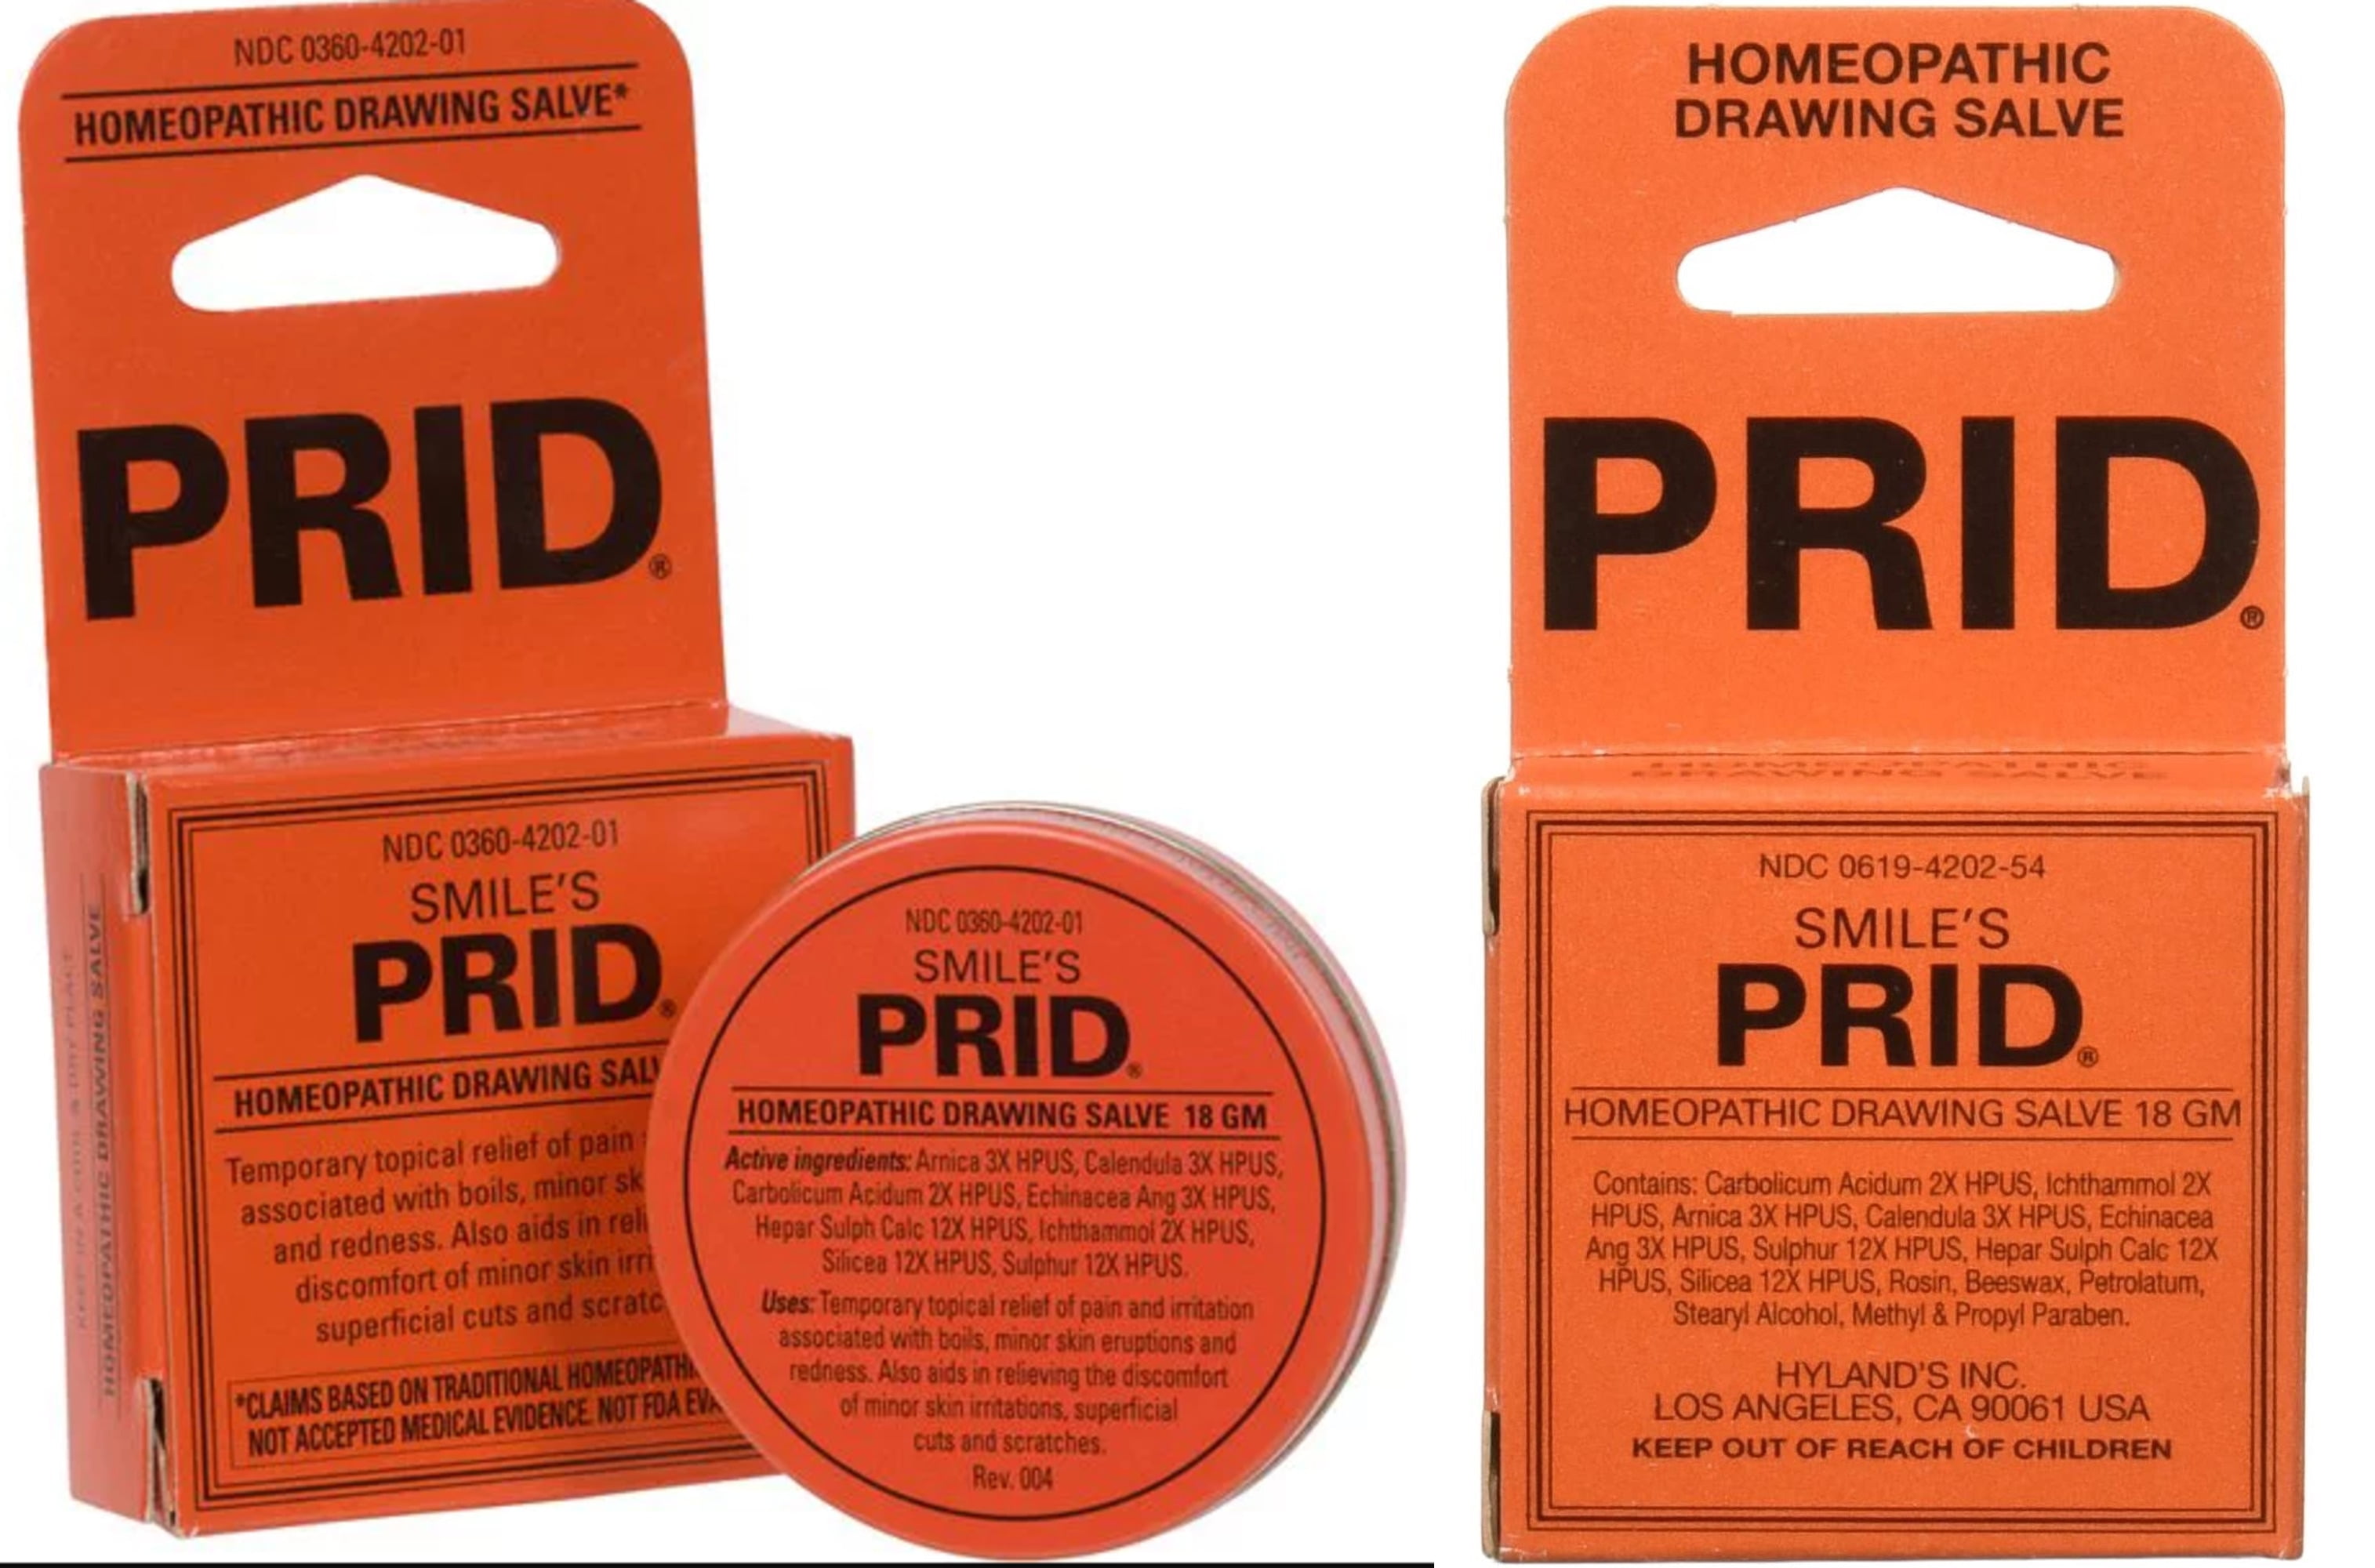 Hyland Smile's Prid All Natural Drawing Salve Ingredients and Reviews